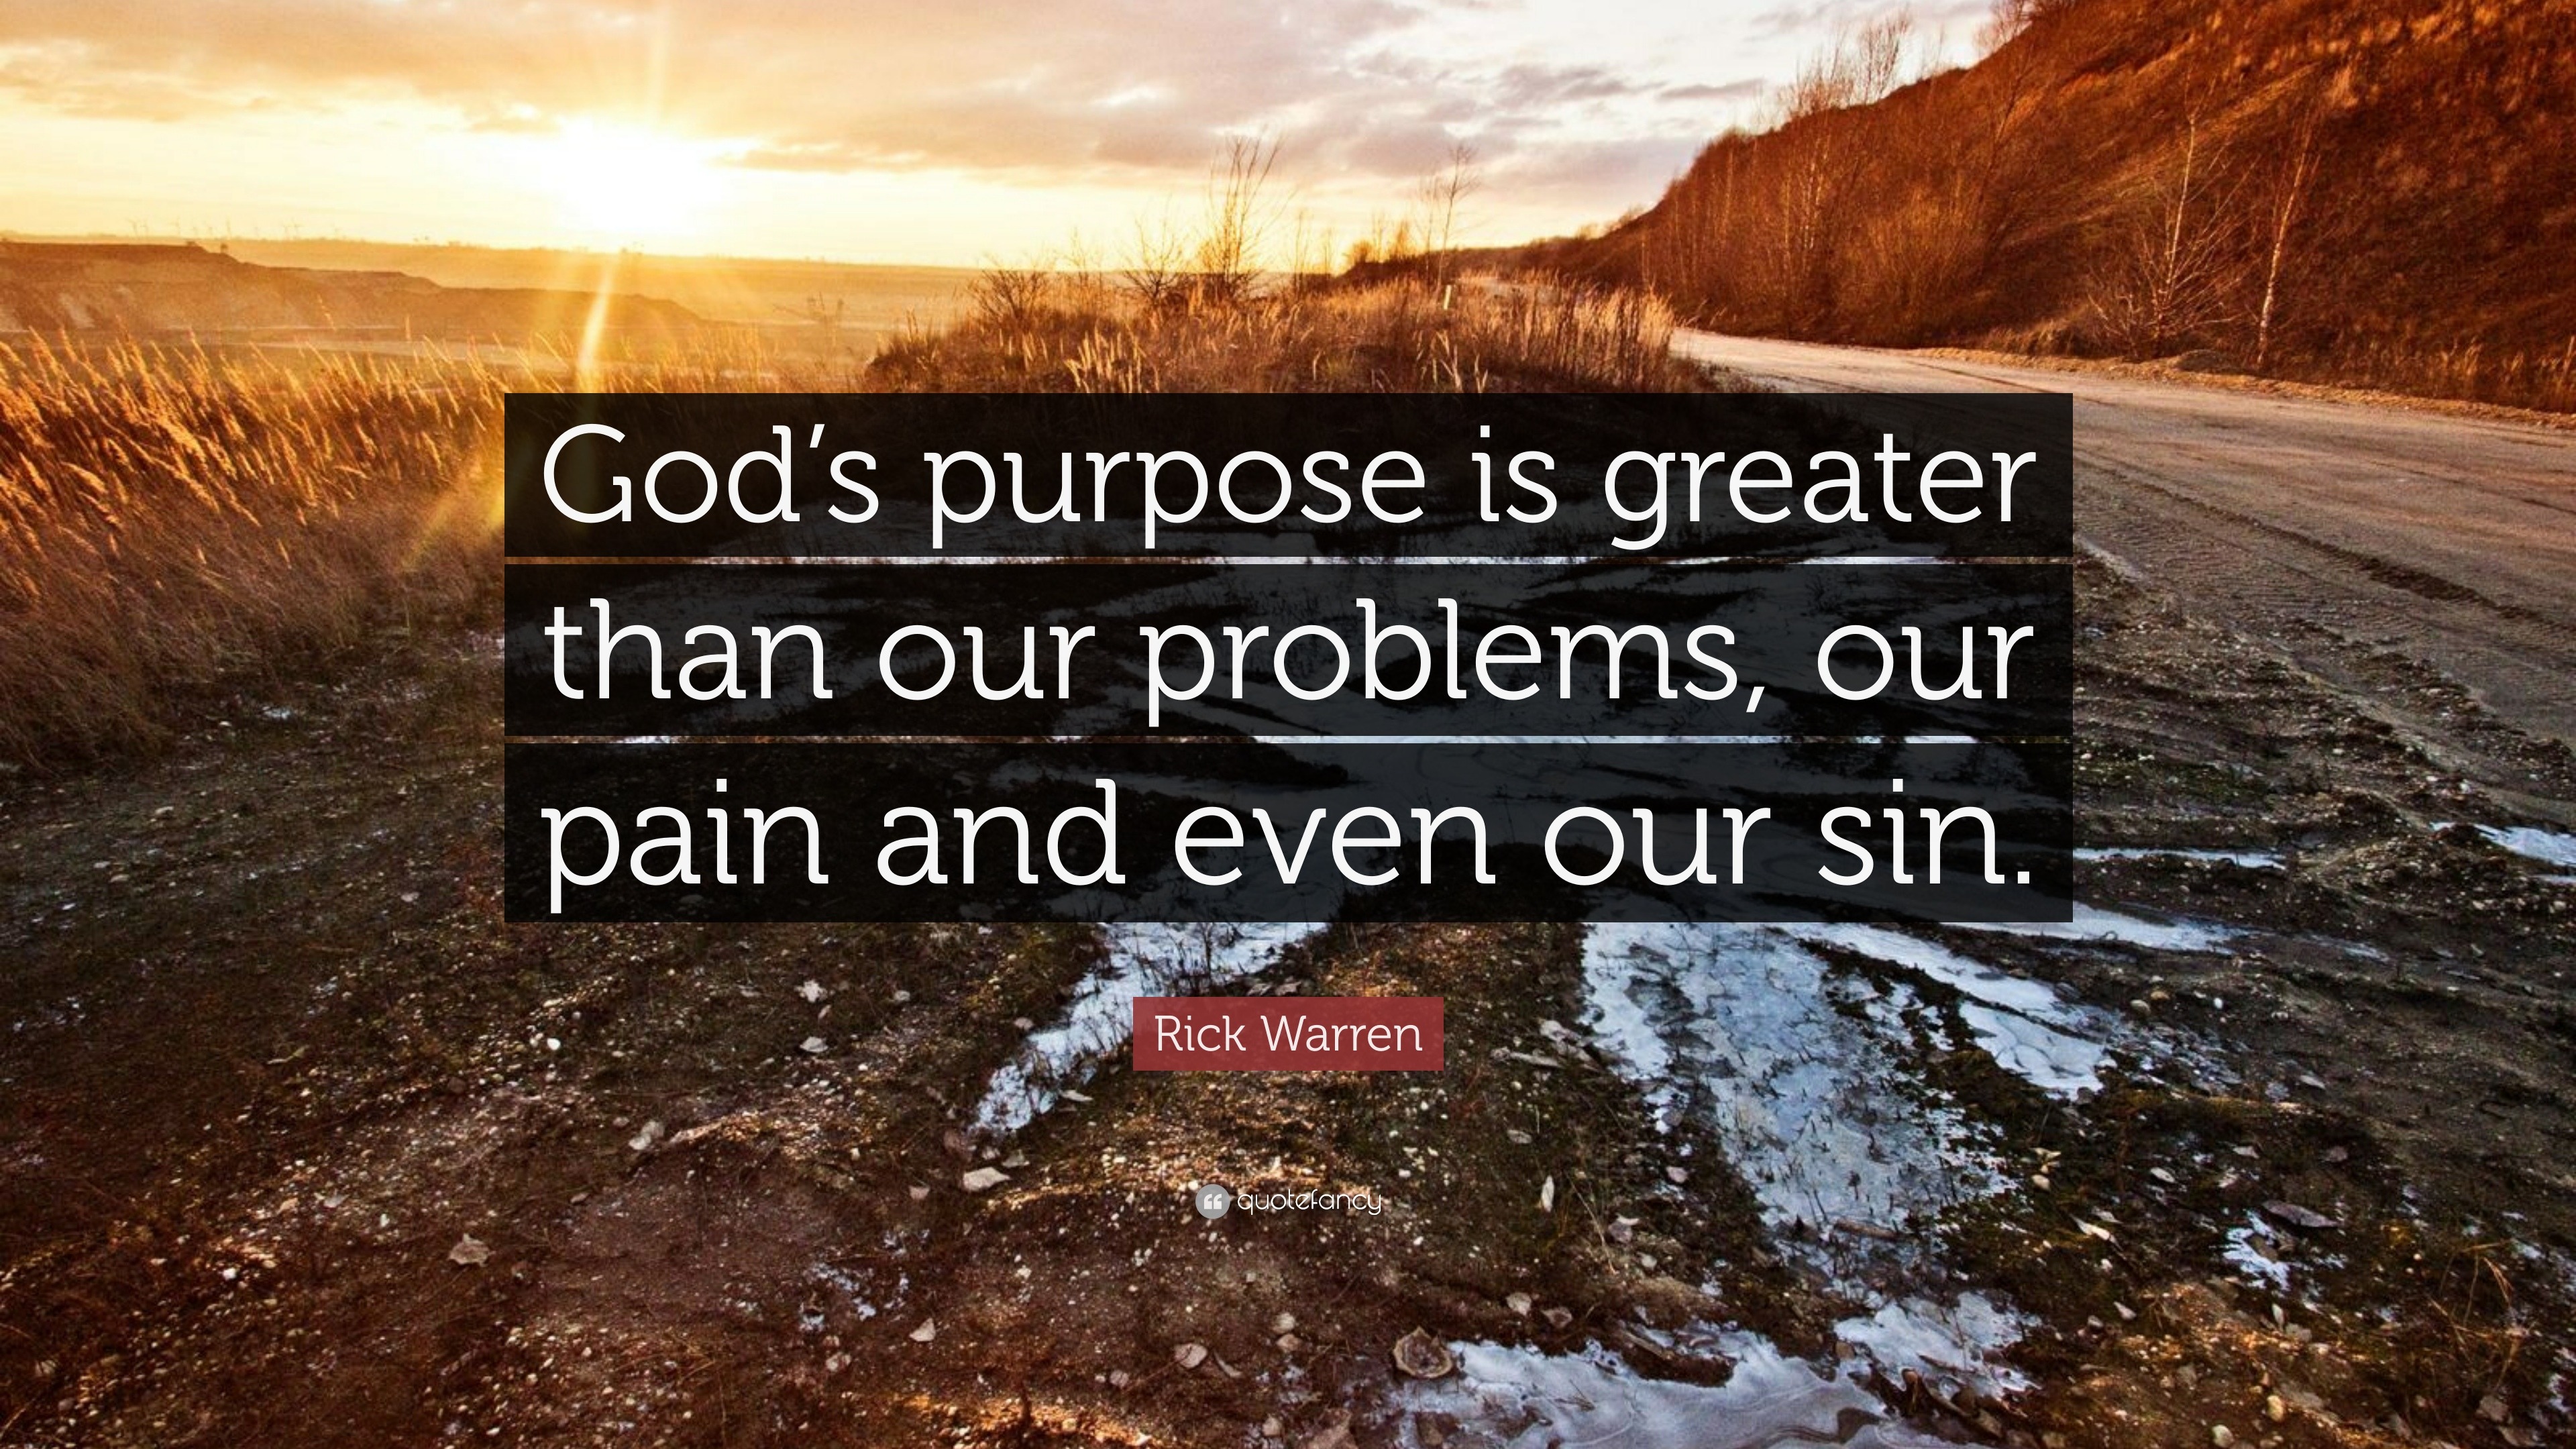 Rick Warren Quote: “God’s purpose is greater than our problems, our ...